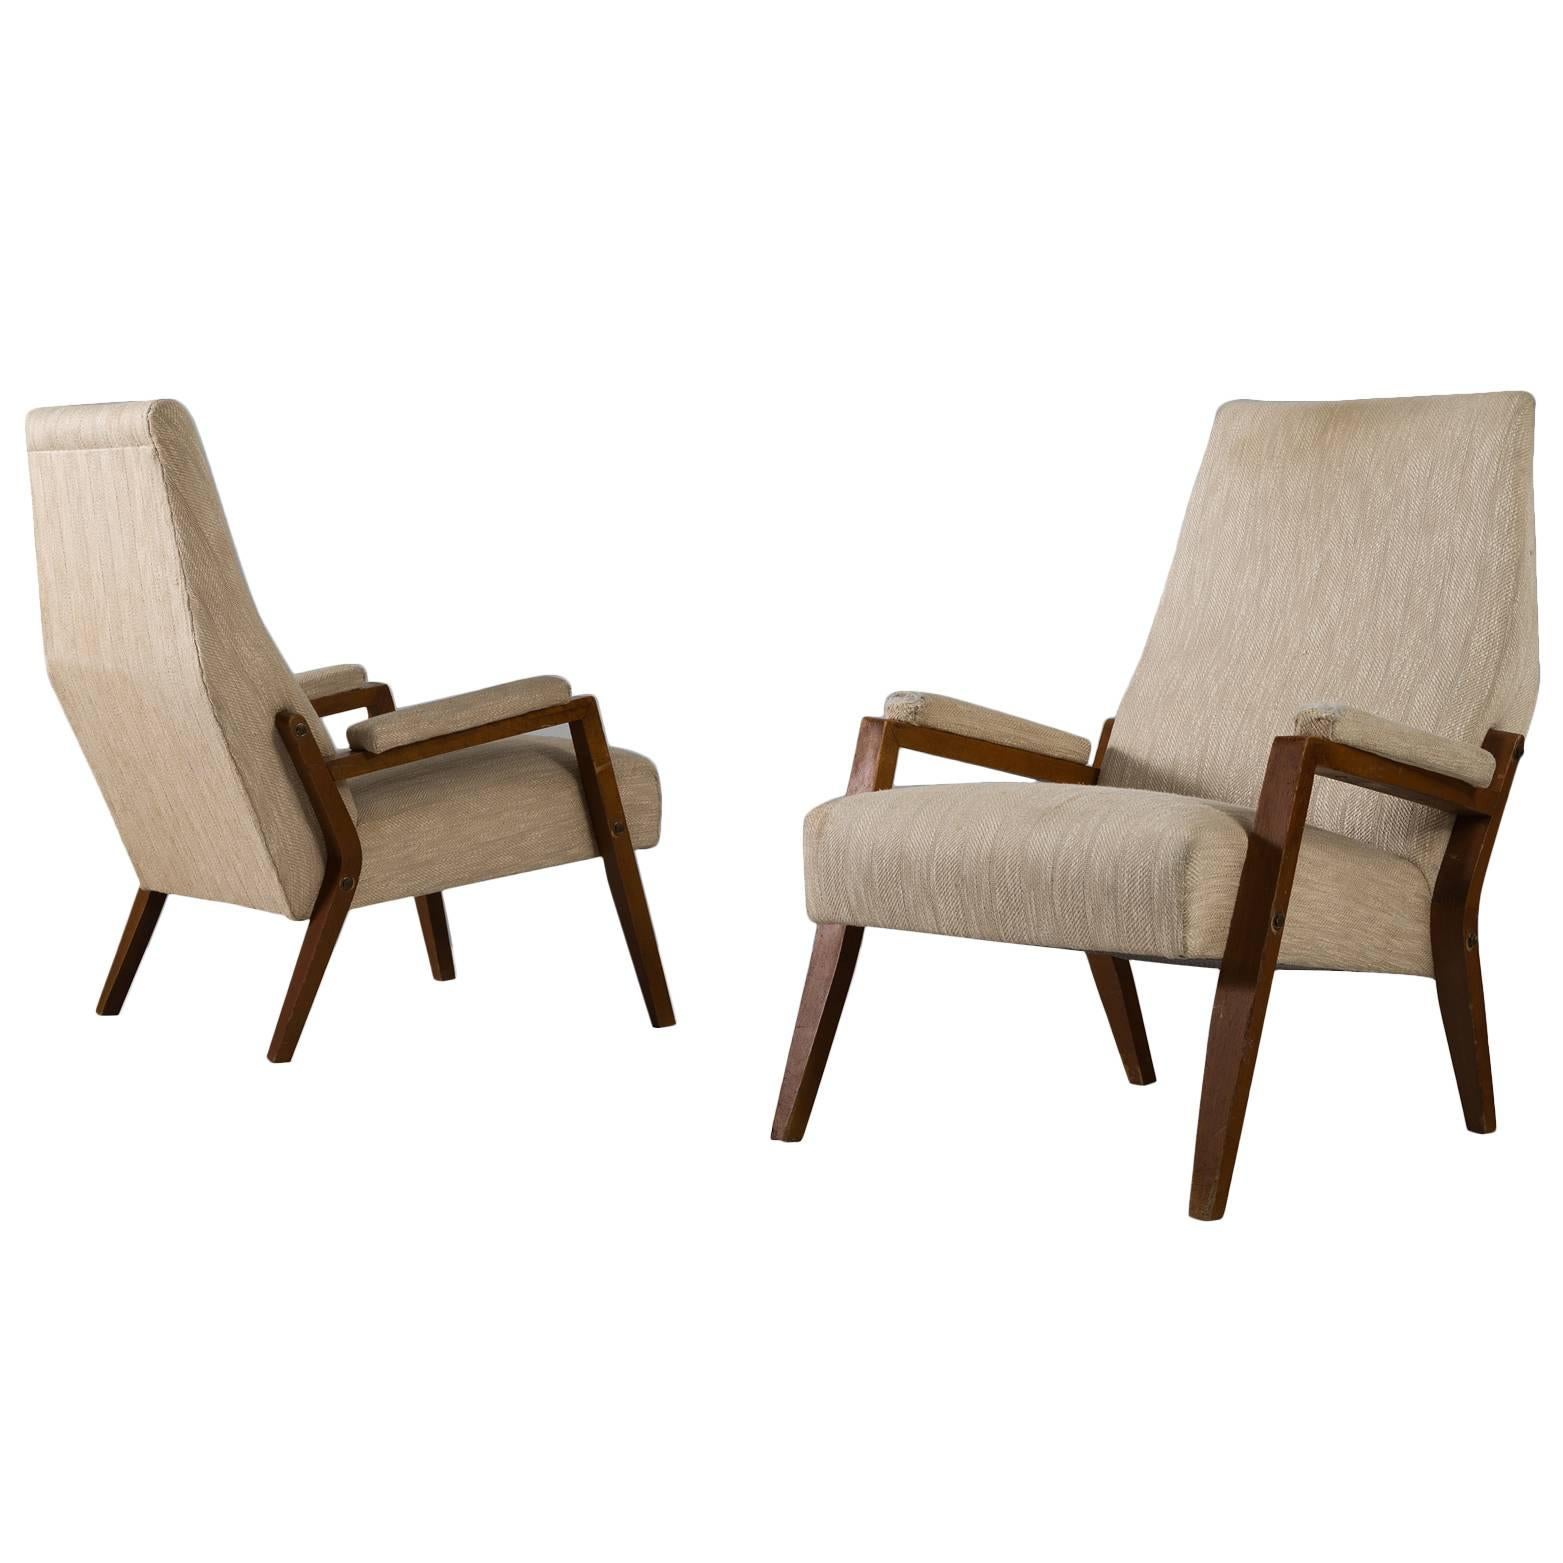 Set of Two Highback Lounge Chairs in Wood and Off-White Fabric